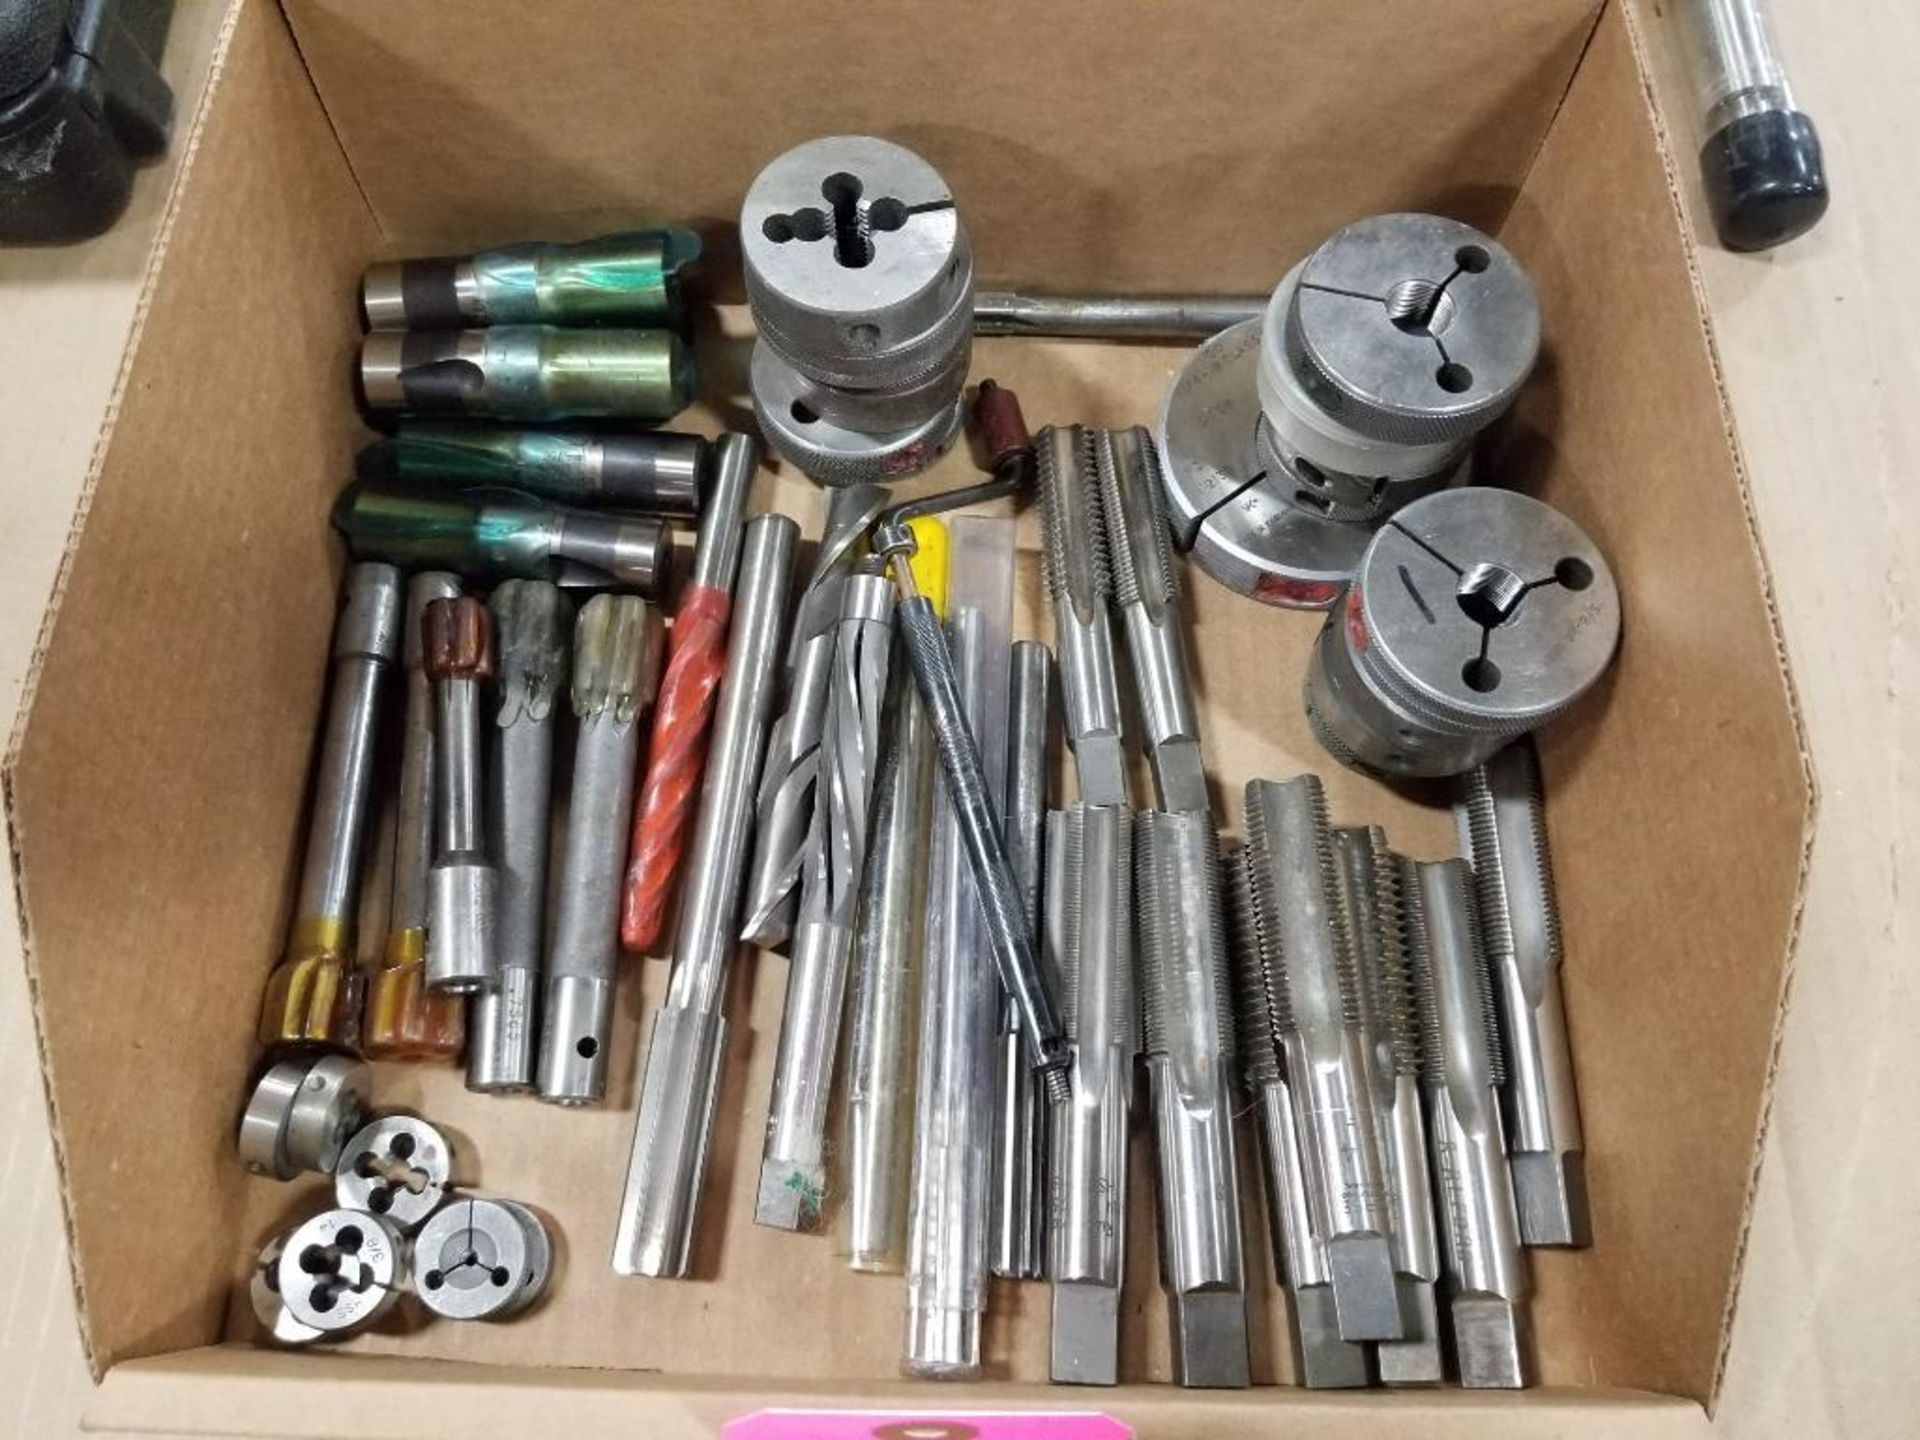 Assorted metalworking tooling. Cutters, taps, reamers.